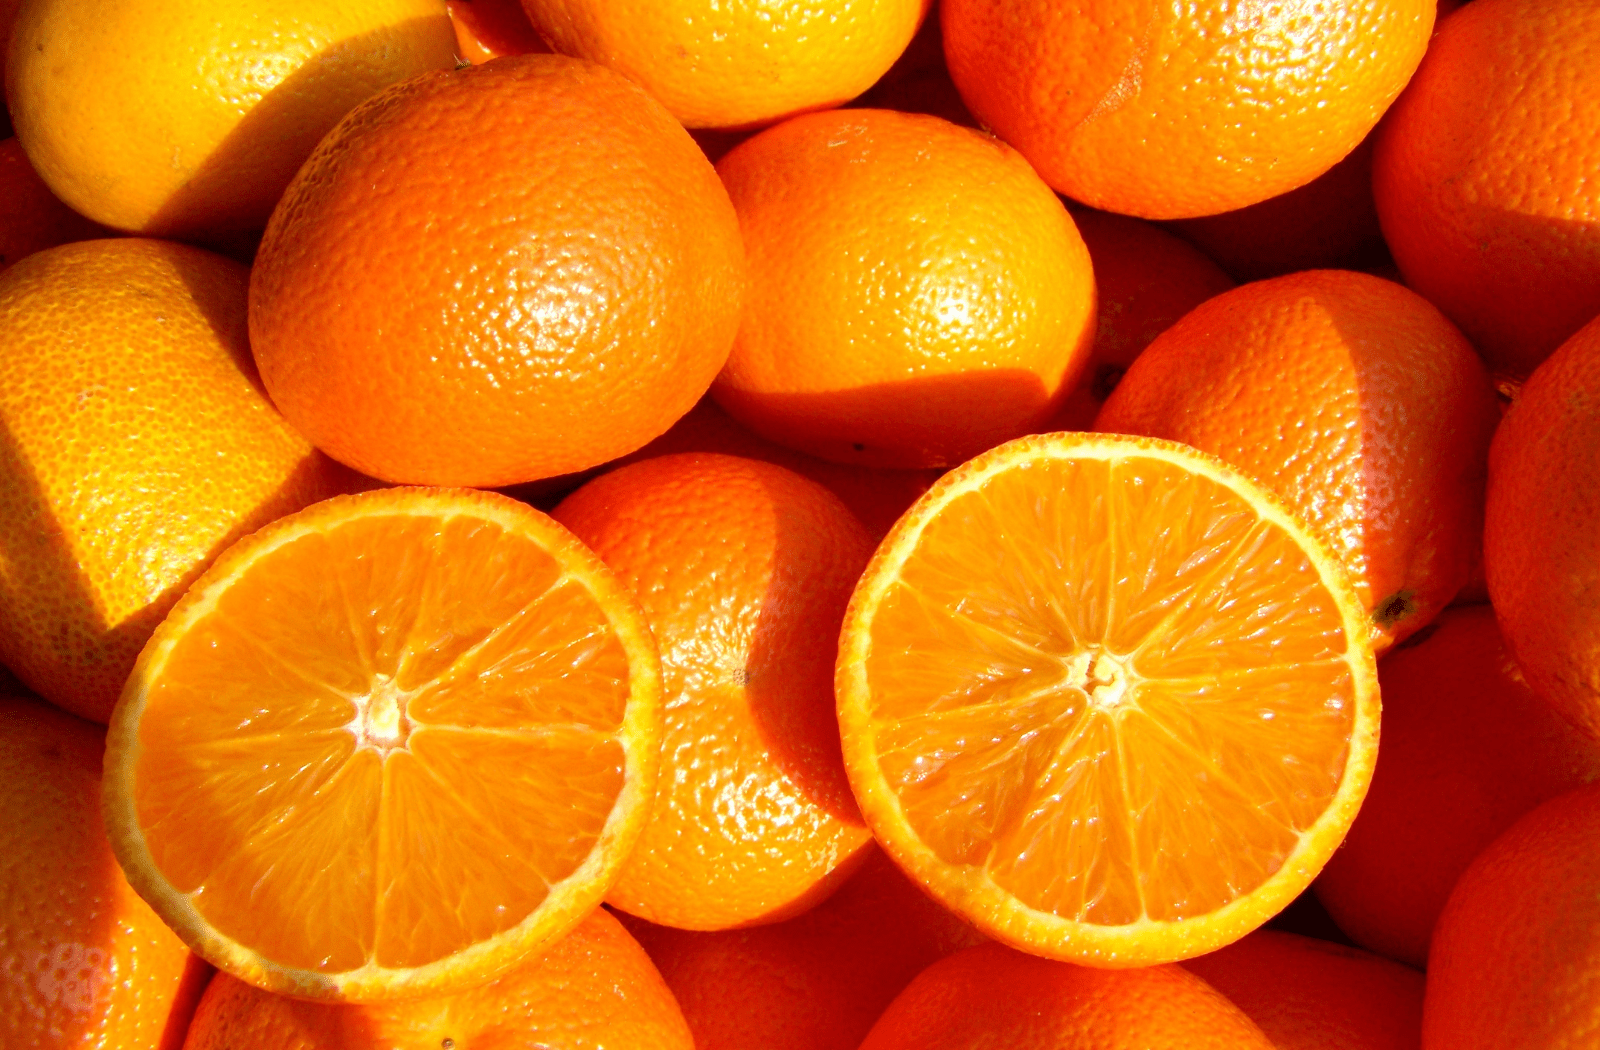 Several oranges sitting out